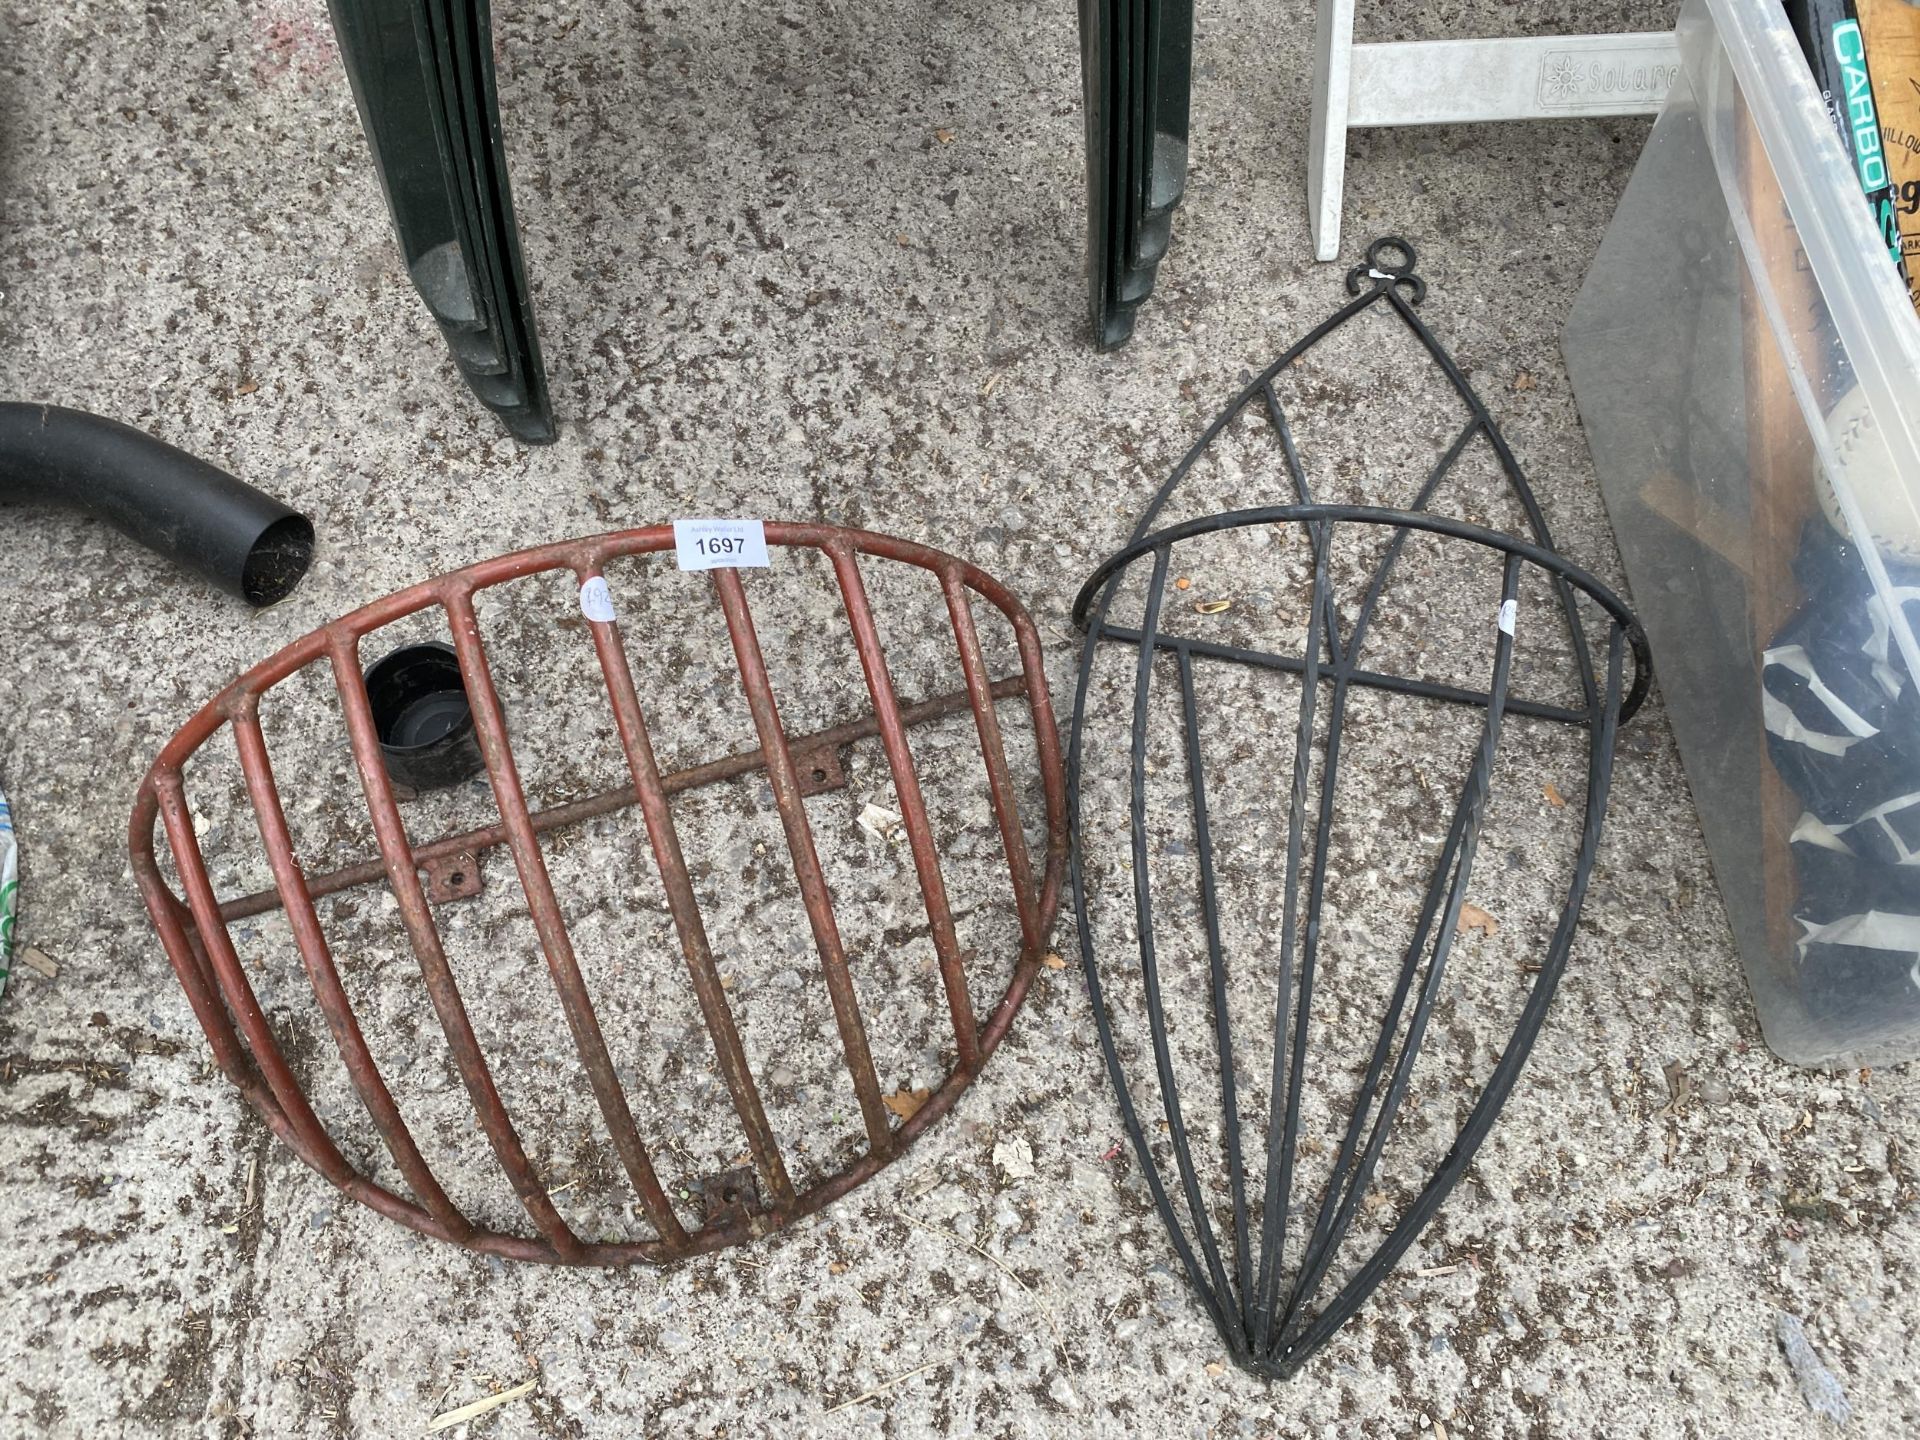 A SMALL METAL HAYRACK PLANTER AND A FURTHER DECORATIVE METAL WALL MOUNTED PLANTER